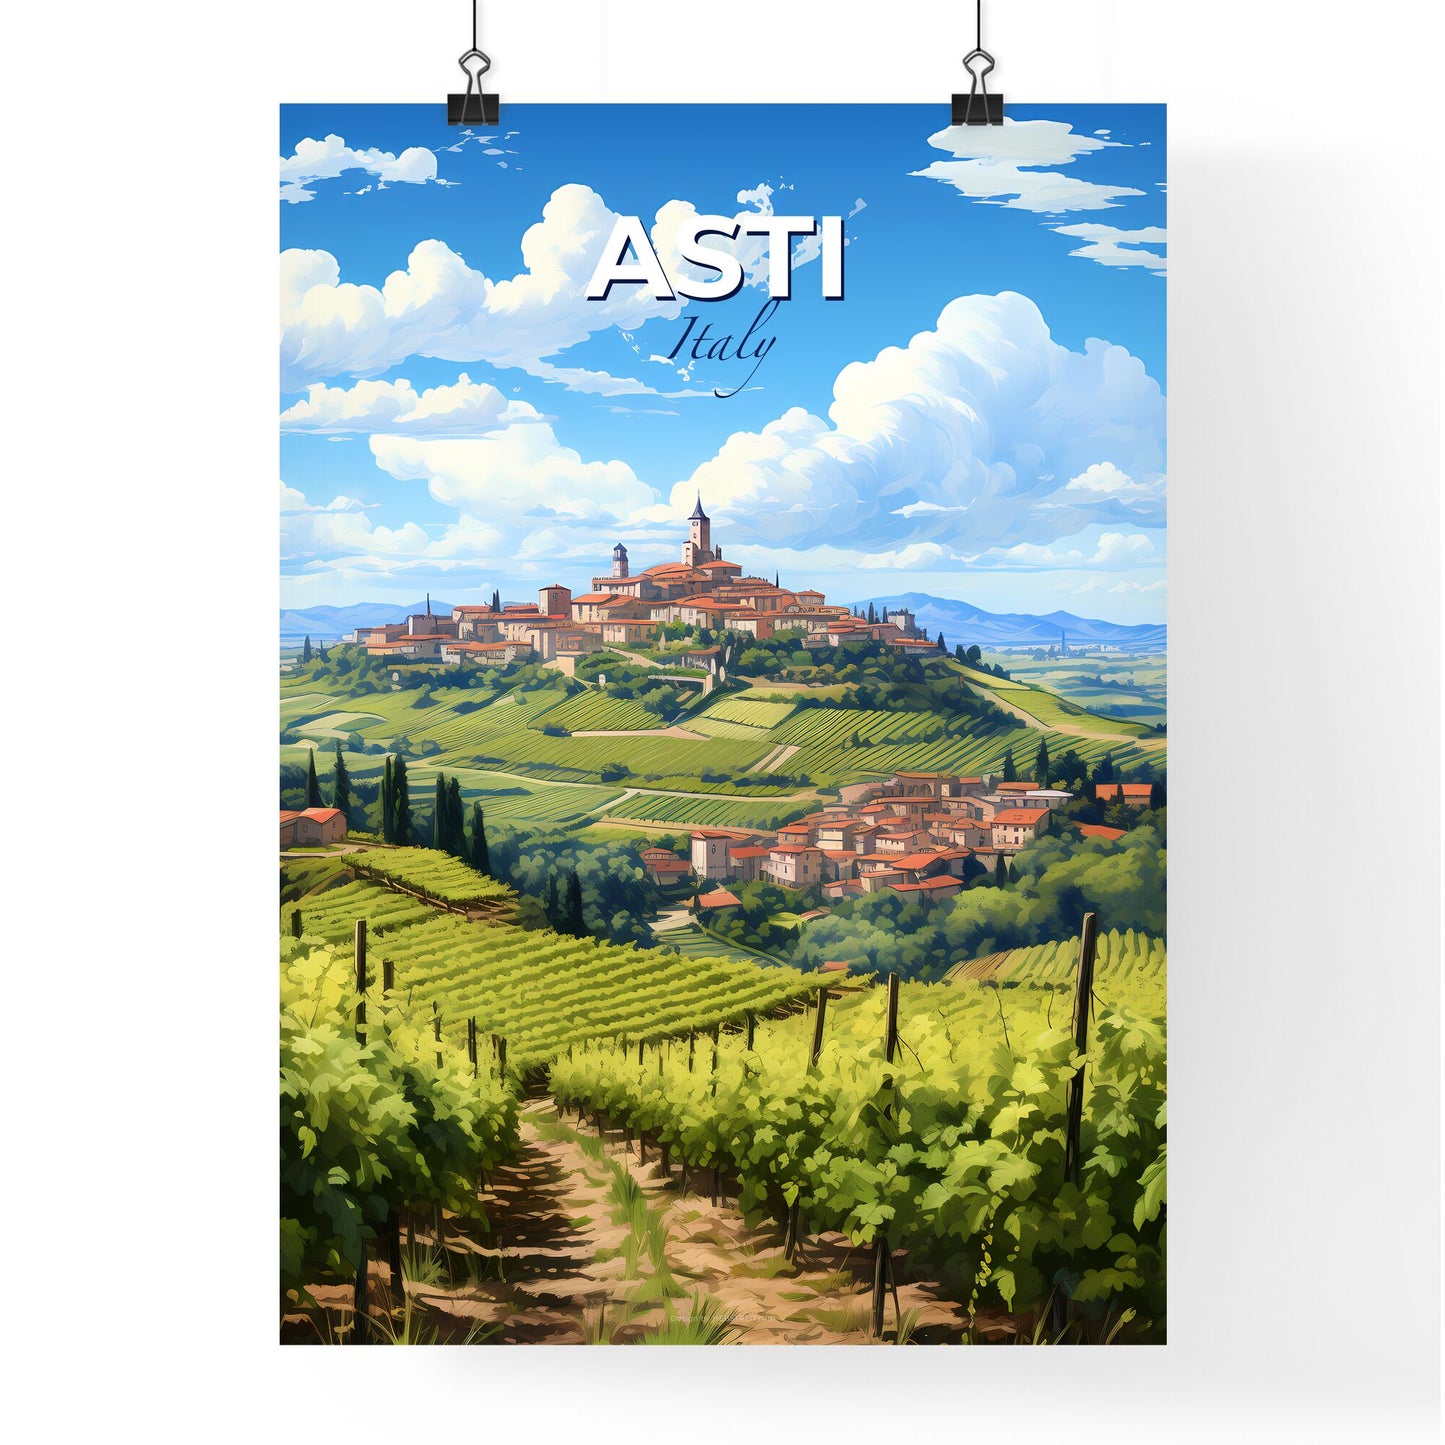 Asti, Italy, A Poster of a landscape of a town on a hill with a vineyard Default Title